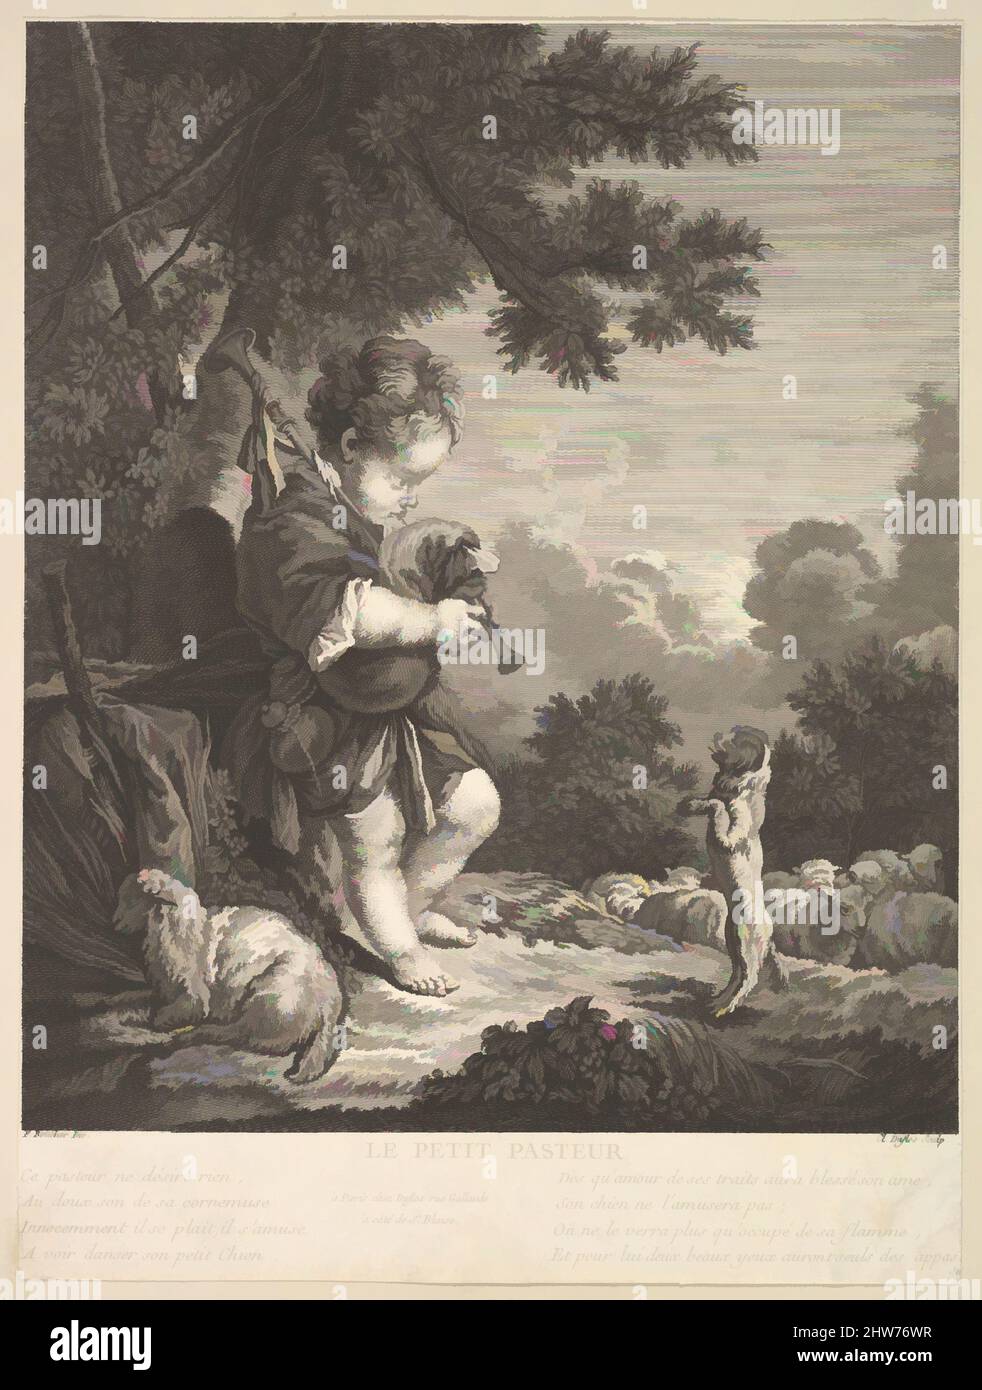 Art inspired by The Little Shepherd, ca. 1753, Etching and engraving, Sheet (trimmed): 10 11/16 in. × 8 in. (27.2 × 20.3 cm), Prints, Claude Augustin Duflos le Jeune (French, Paris 1700–1786 Paris), After François Boucher (French, Paris 1703–1770 Paris, Classic works modernized by Artotop with a splash of modernity. Shapes, color and value, eye-catching visual impact on art. Emotions through freedom of artworks in a contemporary way. A timeless message pursuing a wildly creative new direction. Artists turning to the digital medium and creating the Artotop NFT Stock Photo